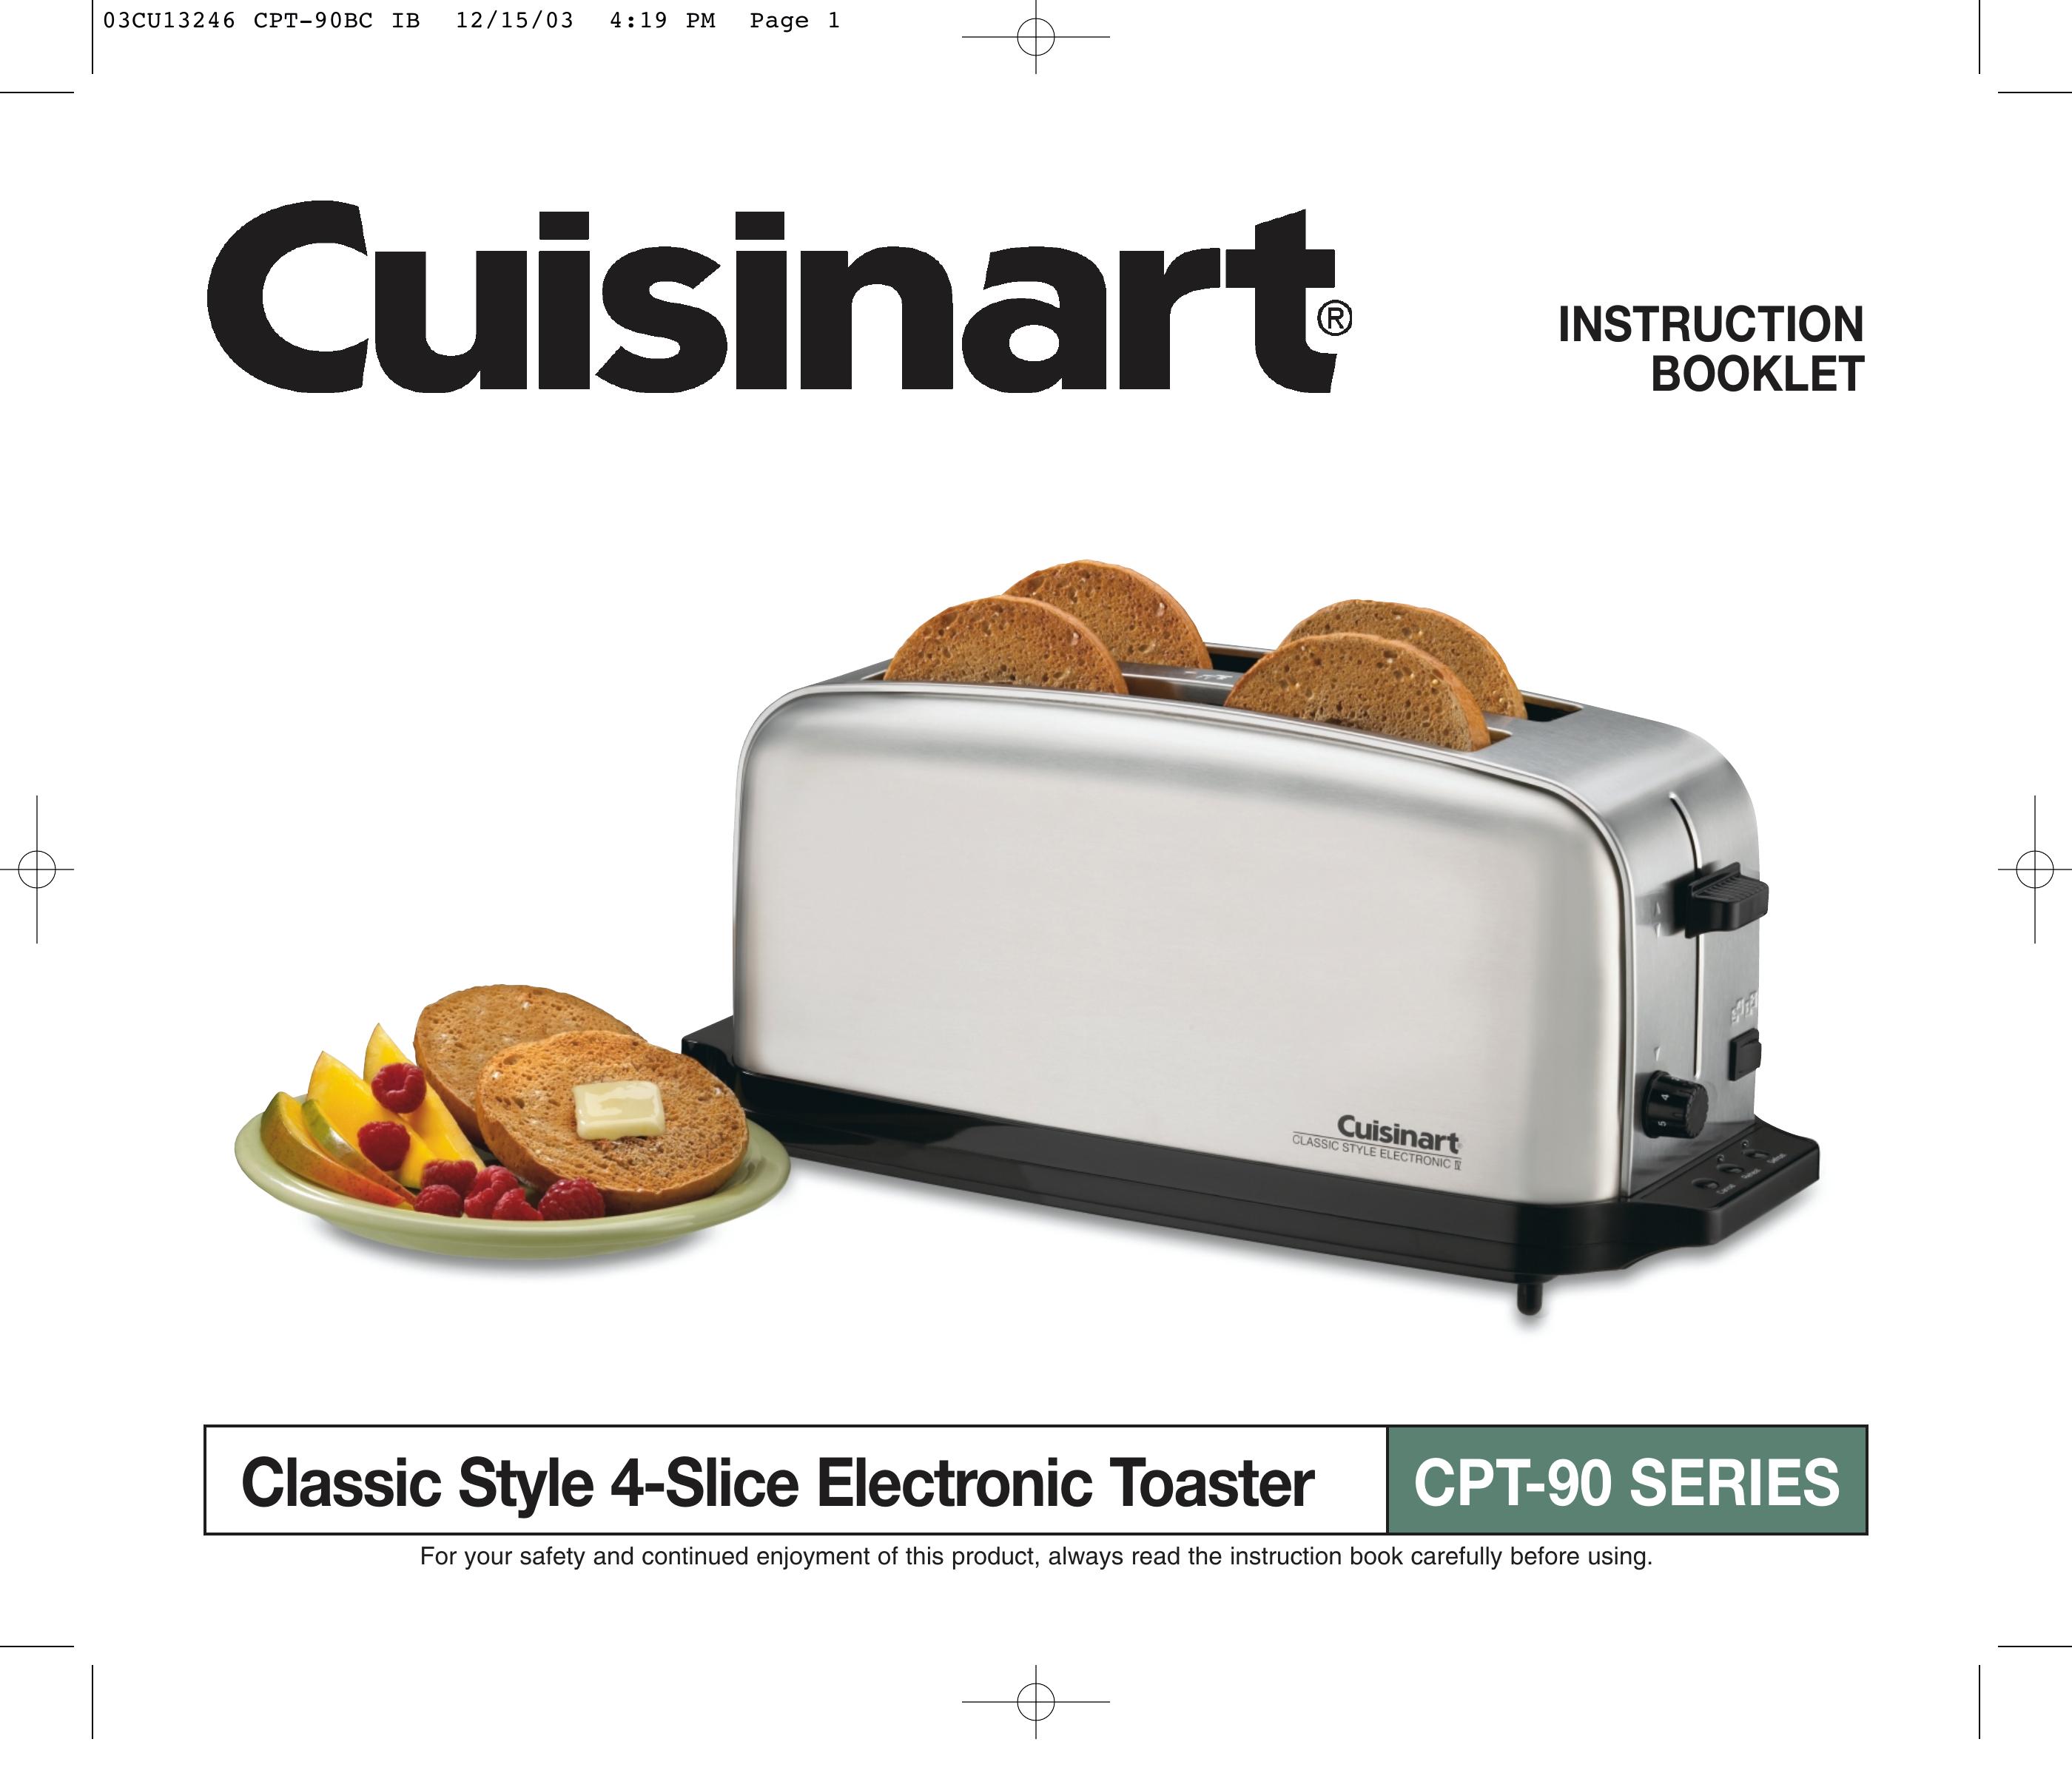 Cuisinart CPT-90 SERIES Toaster User Manual